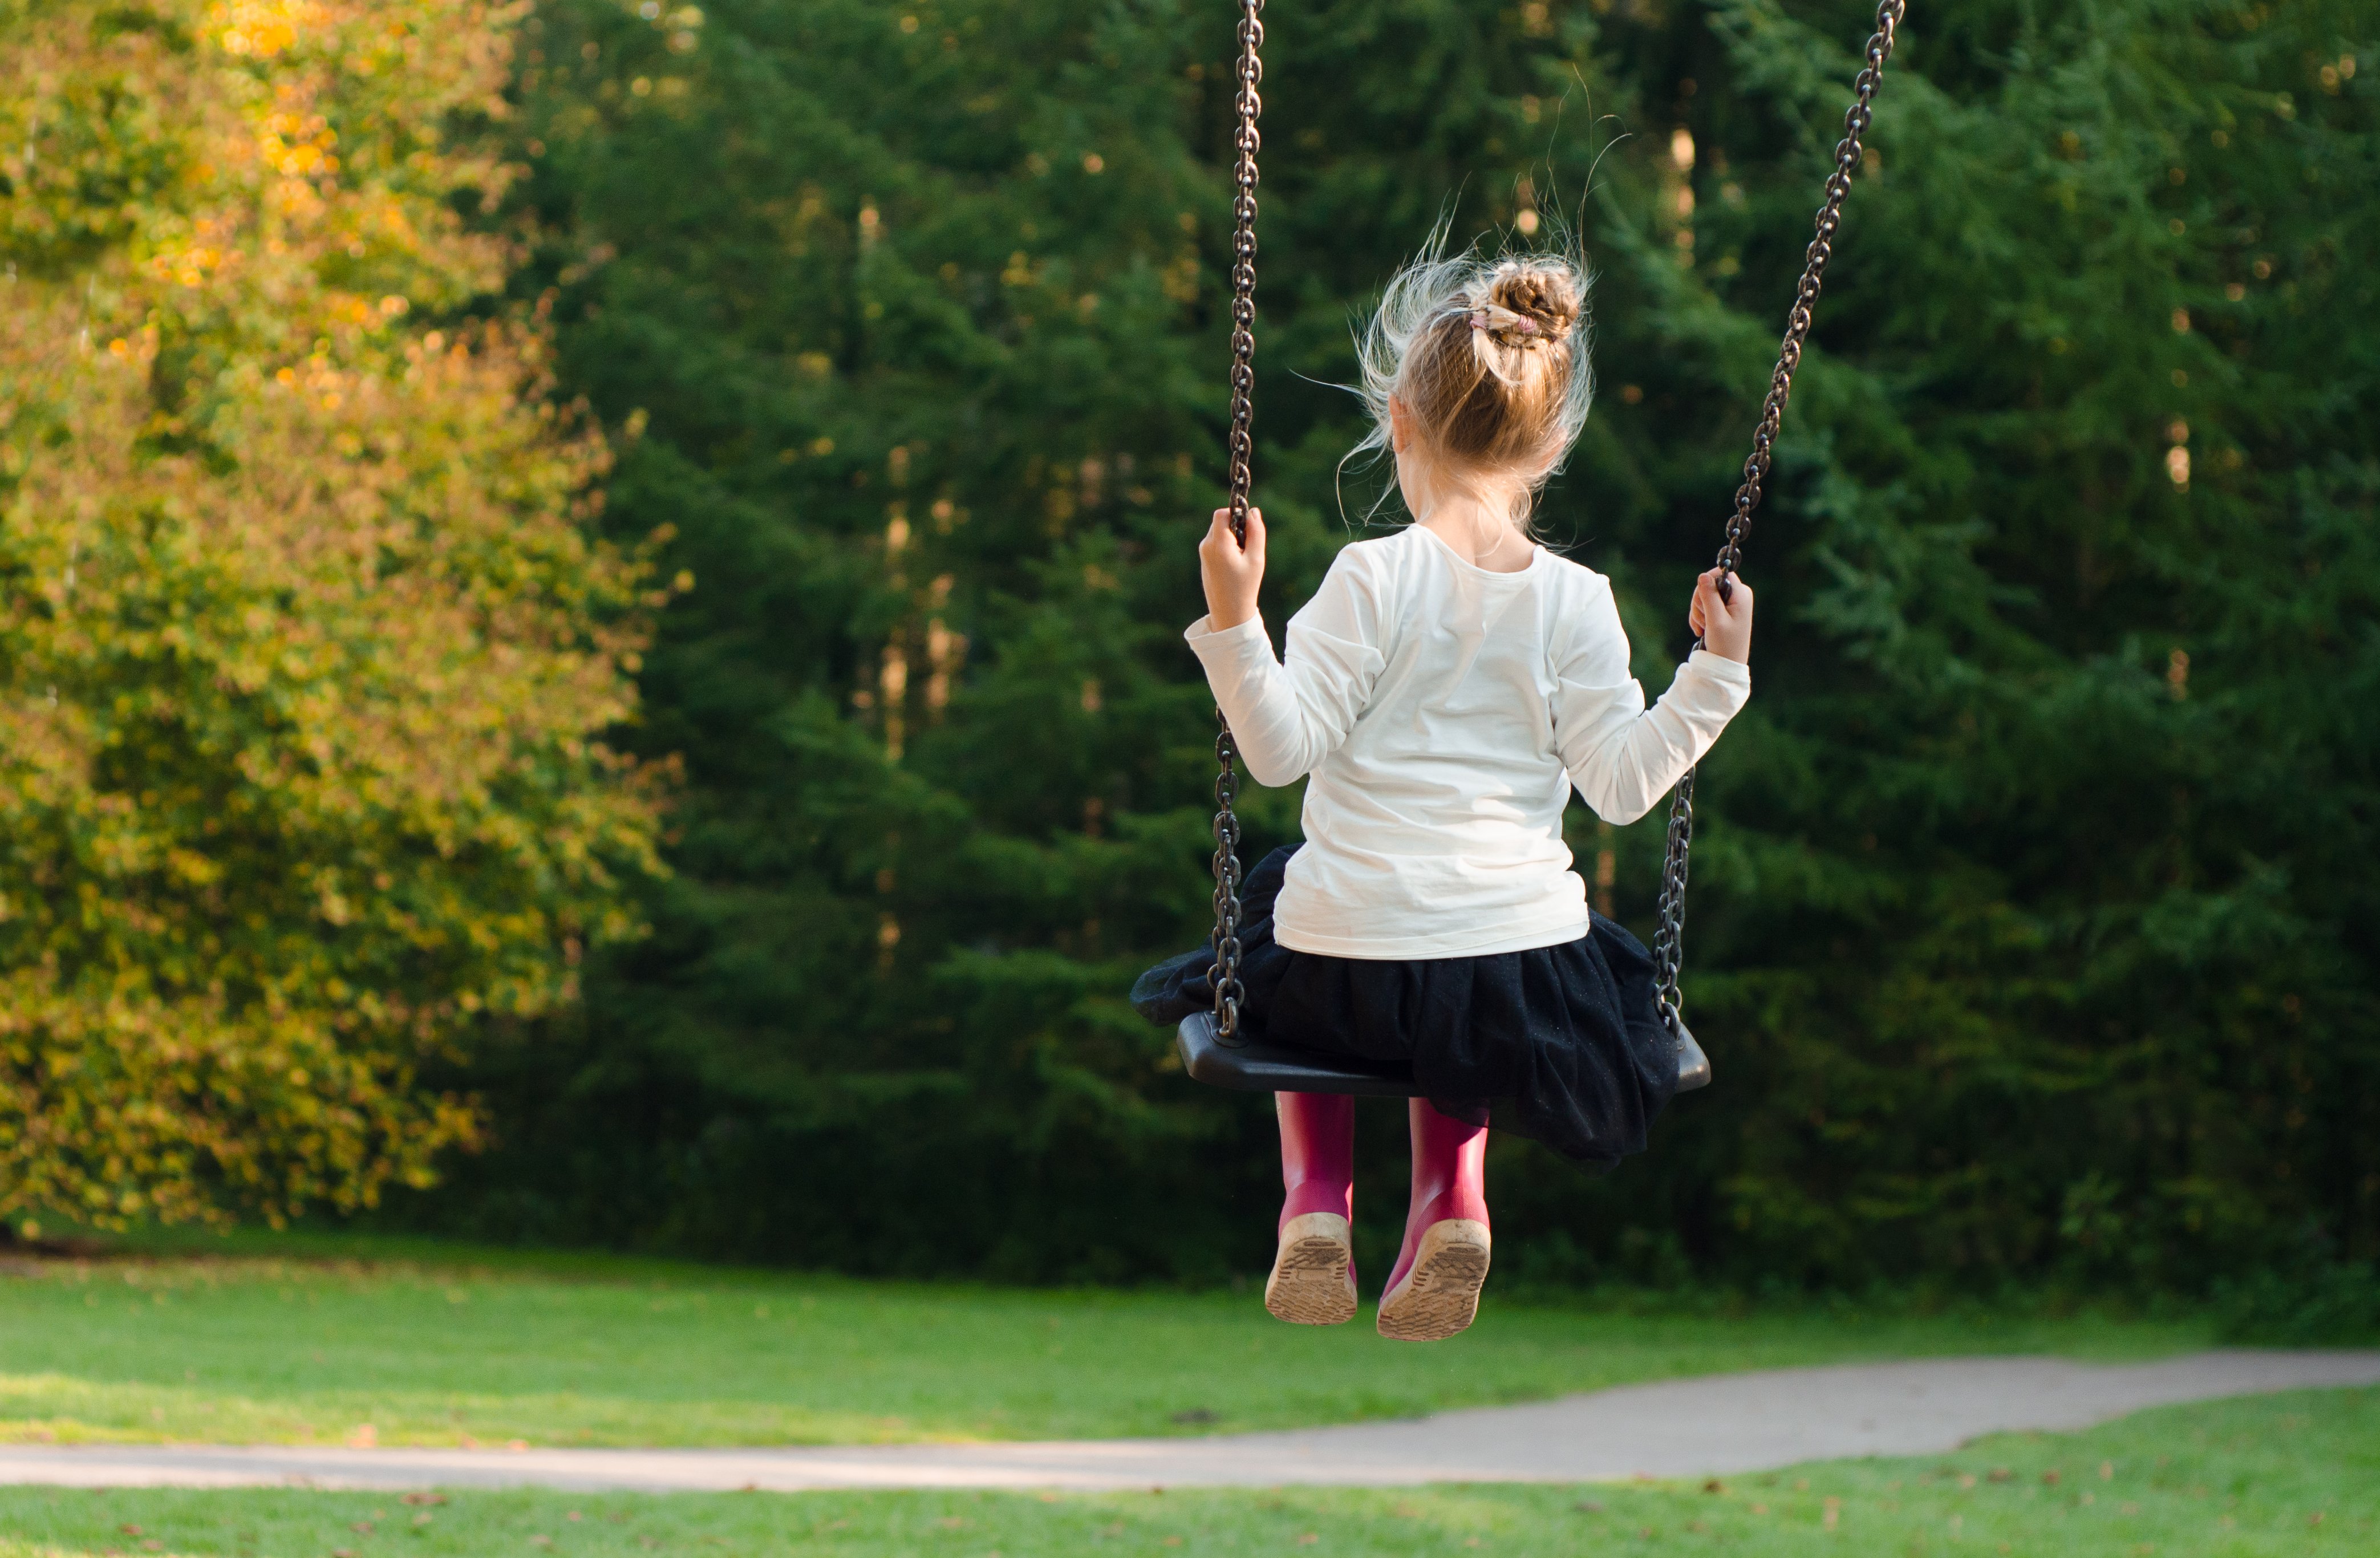 Child on a swing outdoors